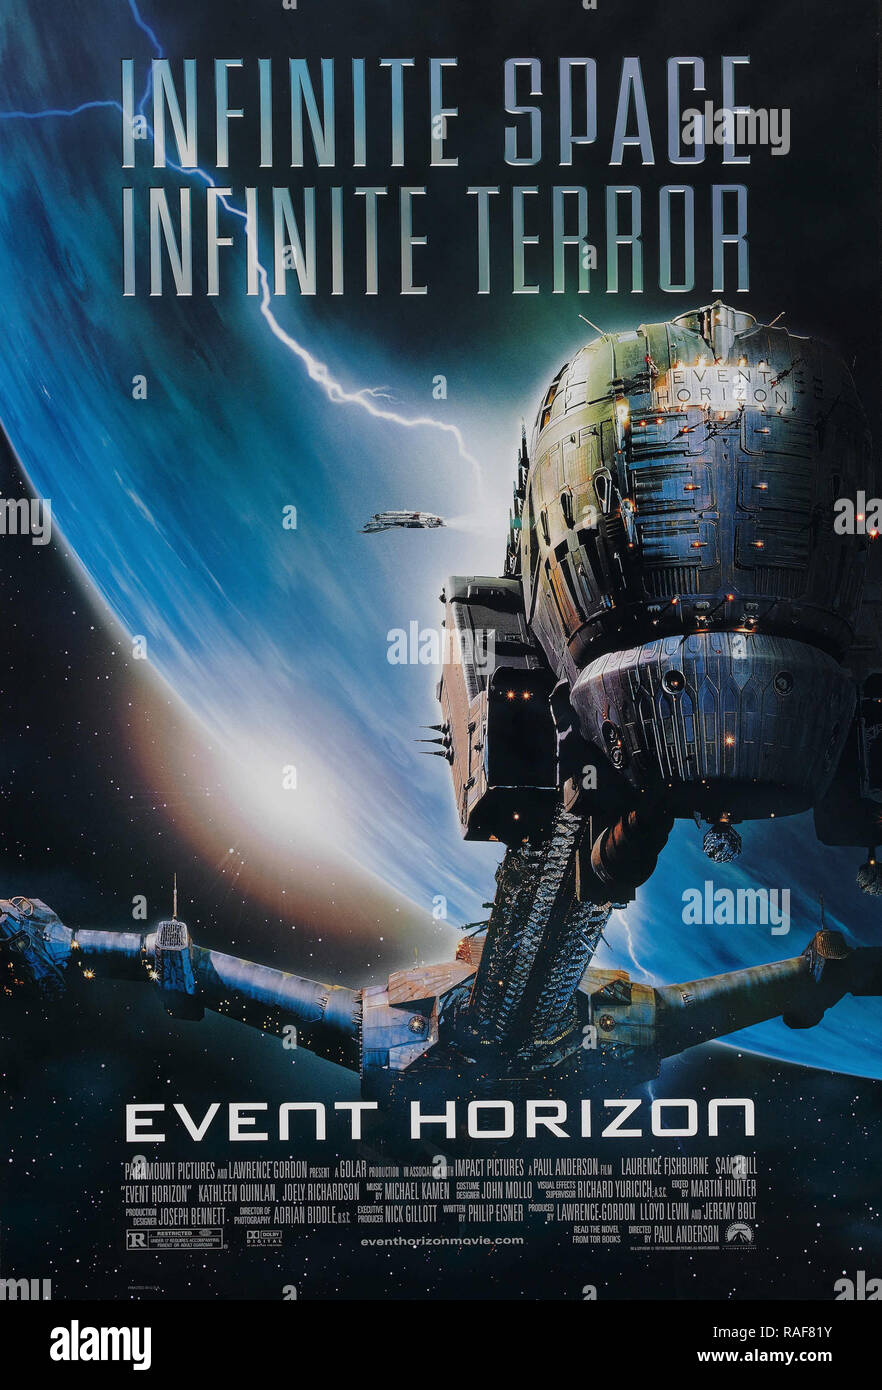 Event Horizon (Paramount, 1997), Poster  Laurence Fishburne  File Reference # 33636 810THA Stock Photo